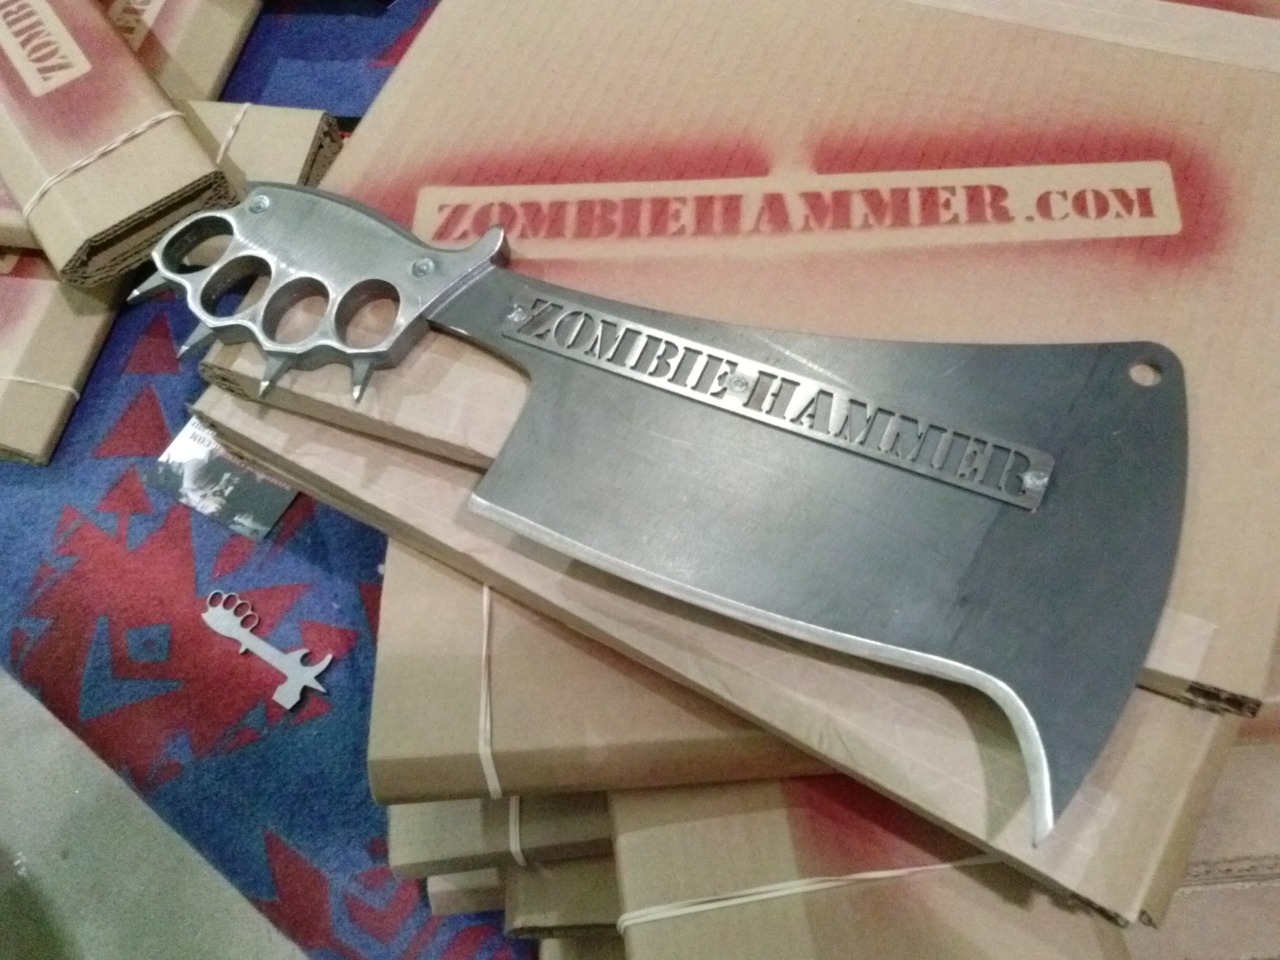 gunrunnerhell:  Zombie Hammer Though they might appear to be props, they are actual